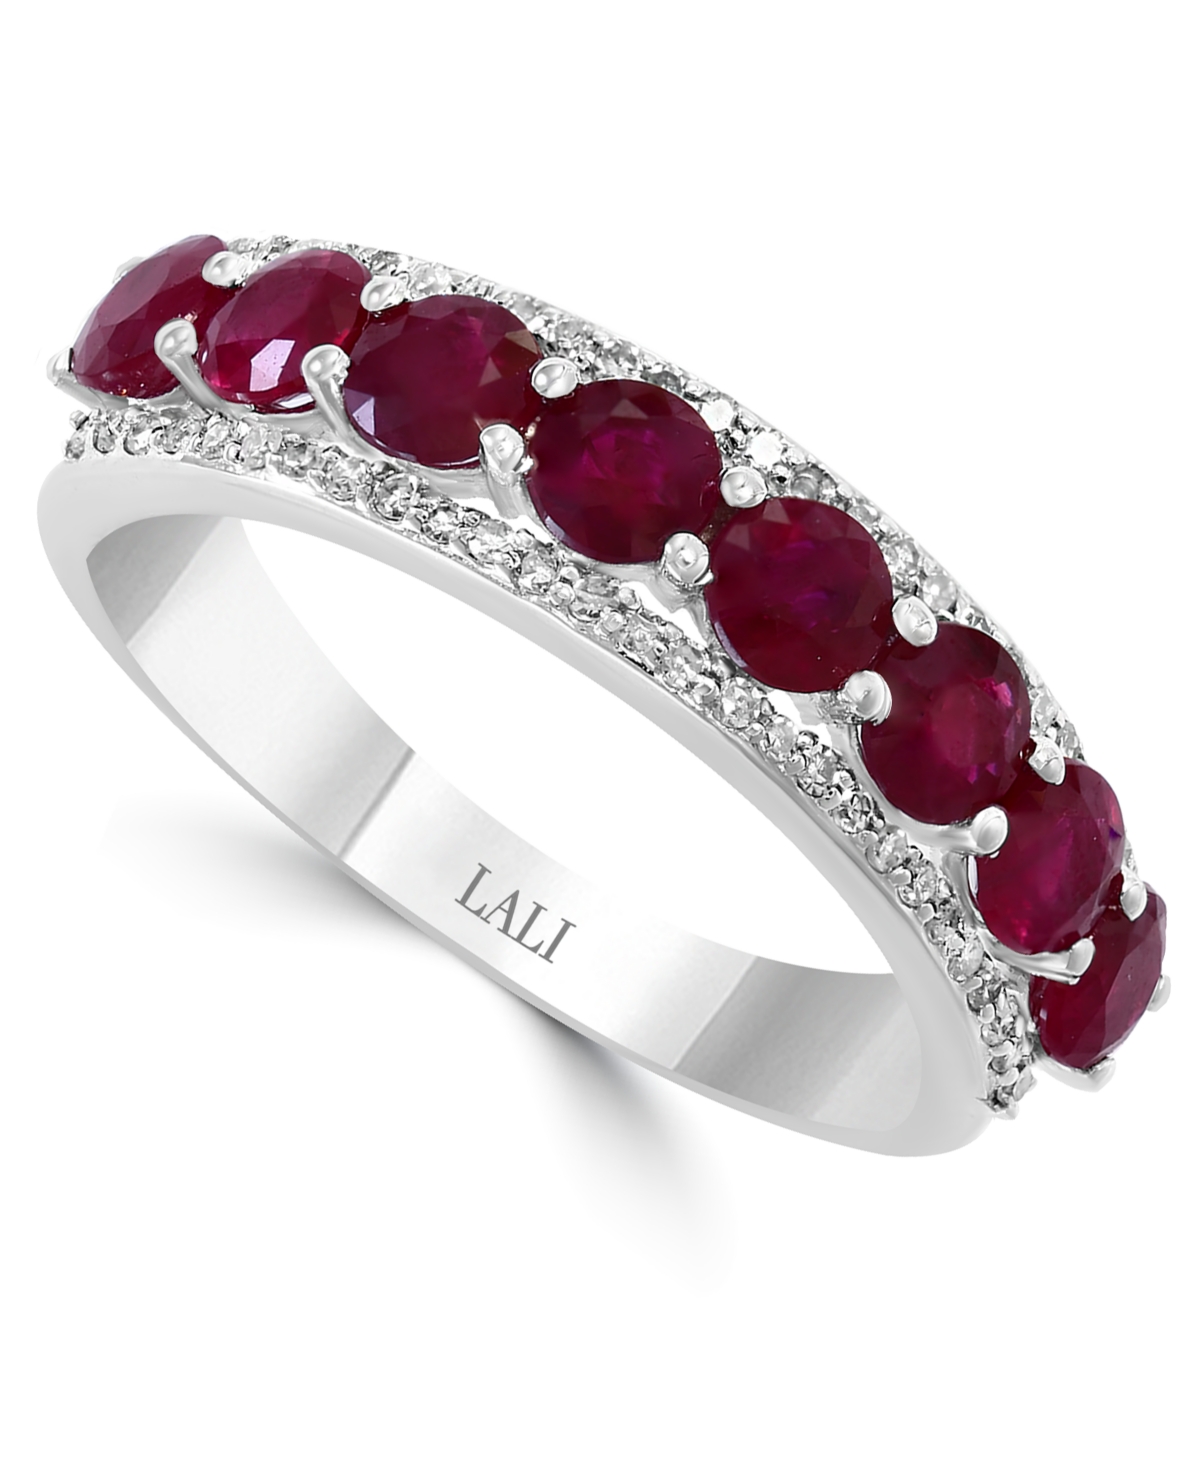 Lali Jewels Ruby (1-7/8 ct. t.w.) & Diamond (1/6 ct. t.w.) Ring in 14k White Gold